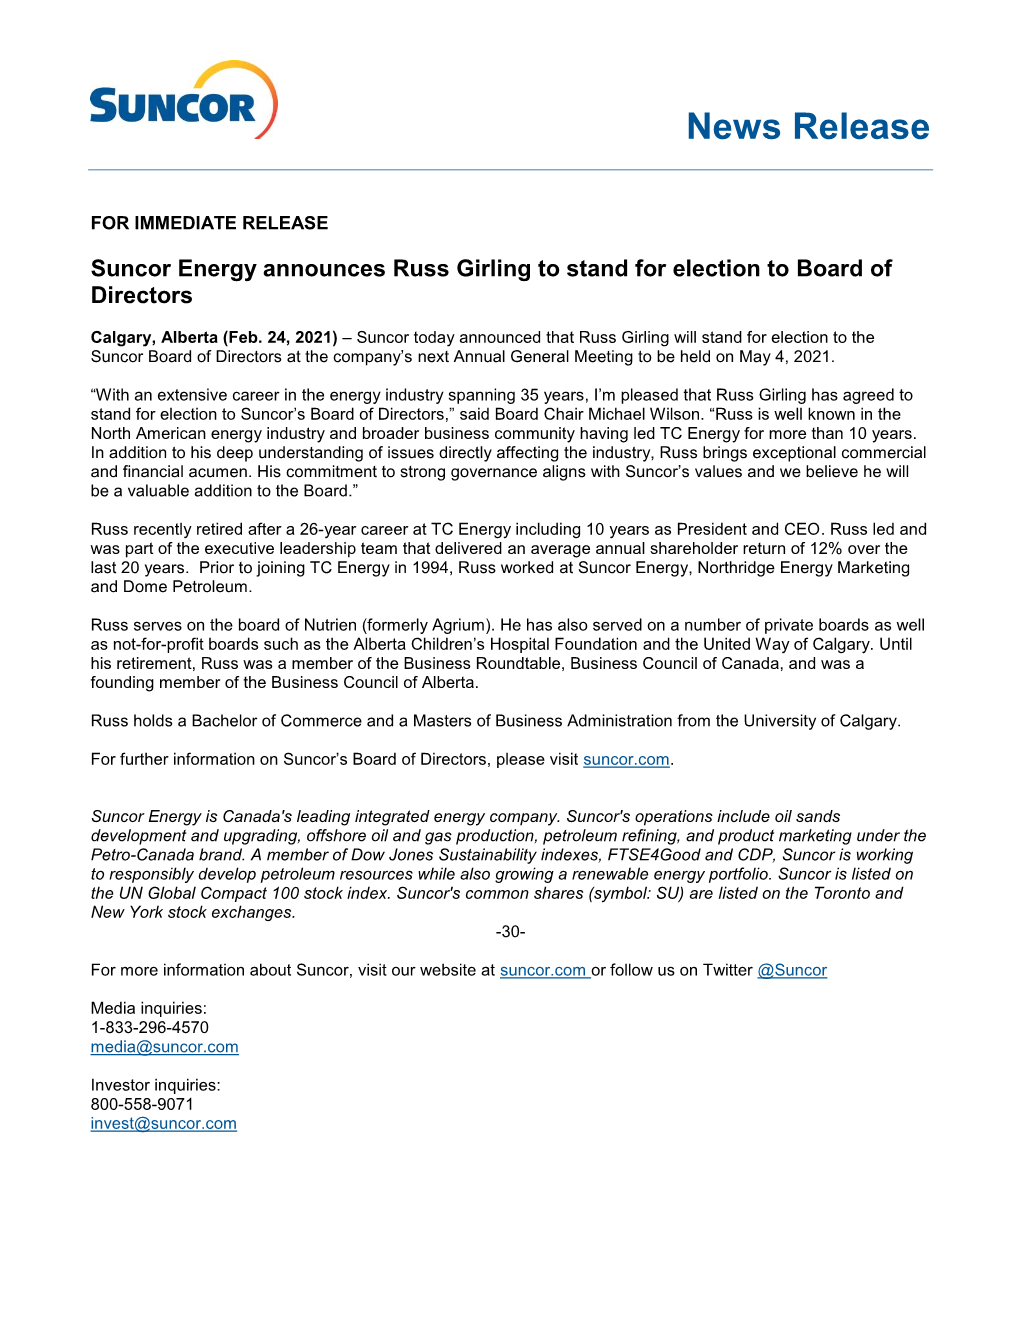 Suncor Energy Announces Russ Girling to Stand for Election to Board of Directors